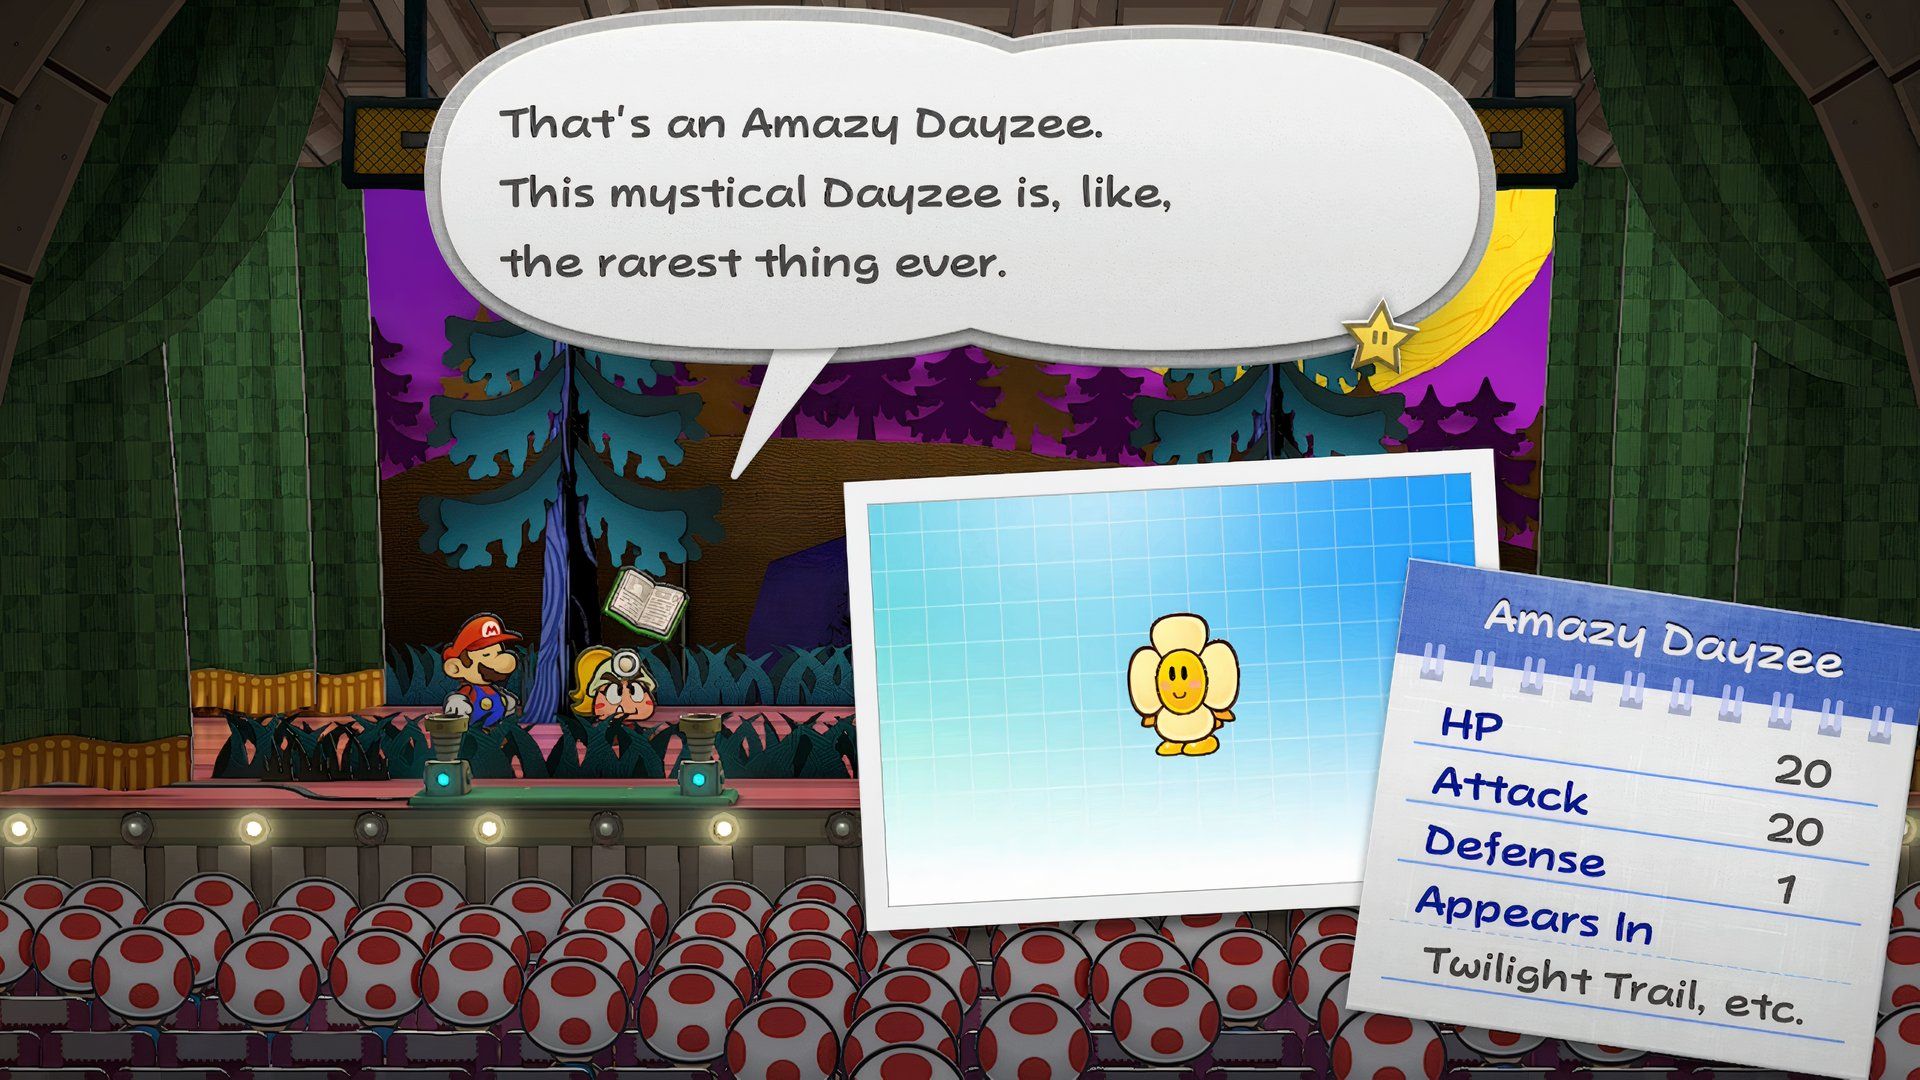 Paper Mario: The Thousand-Year Door - Amazy Dayzee Tattle Log Entry